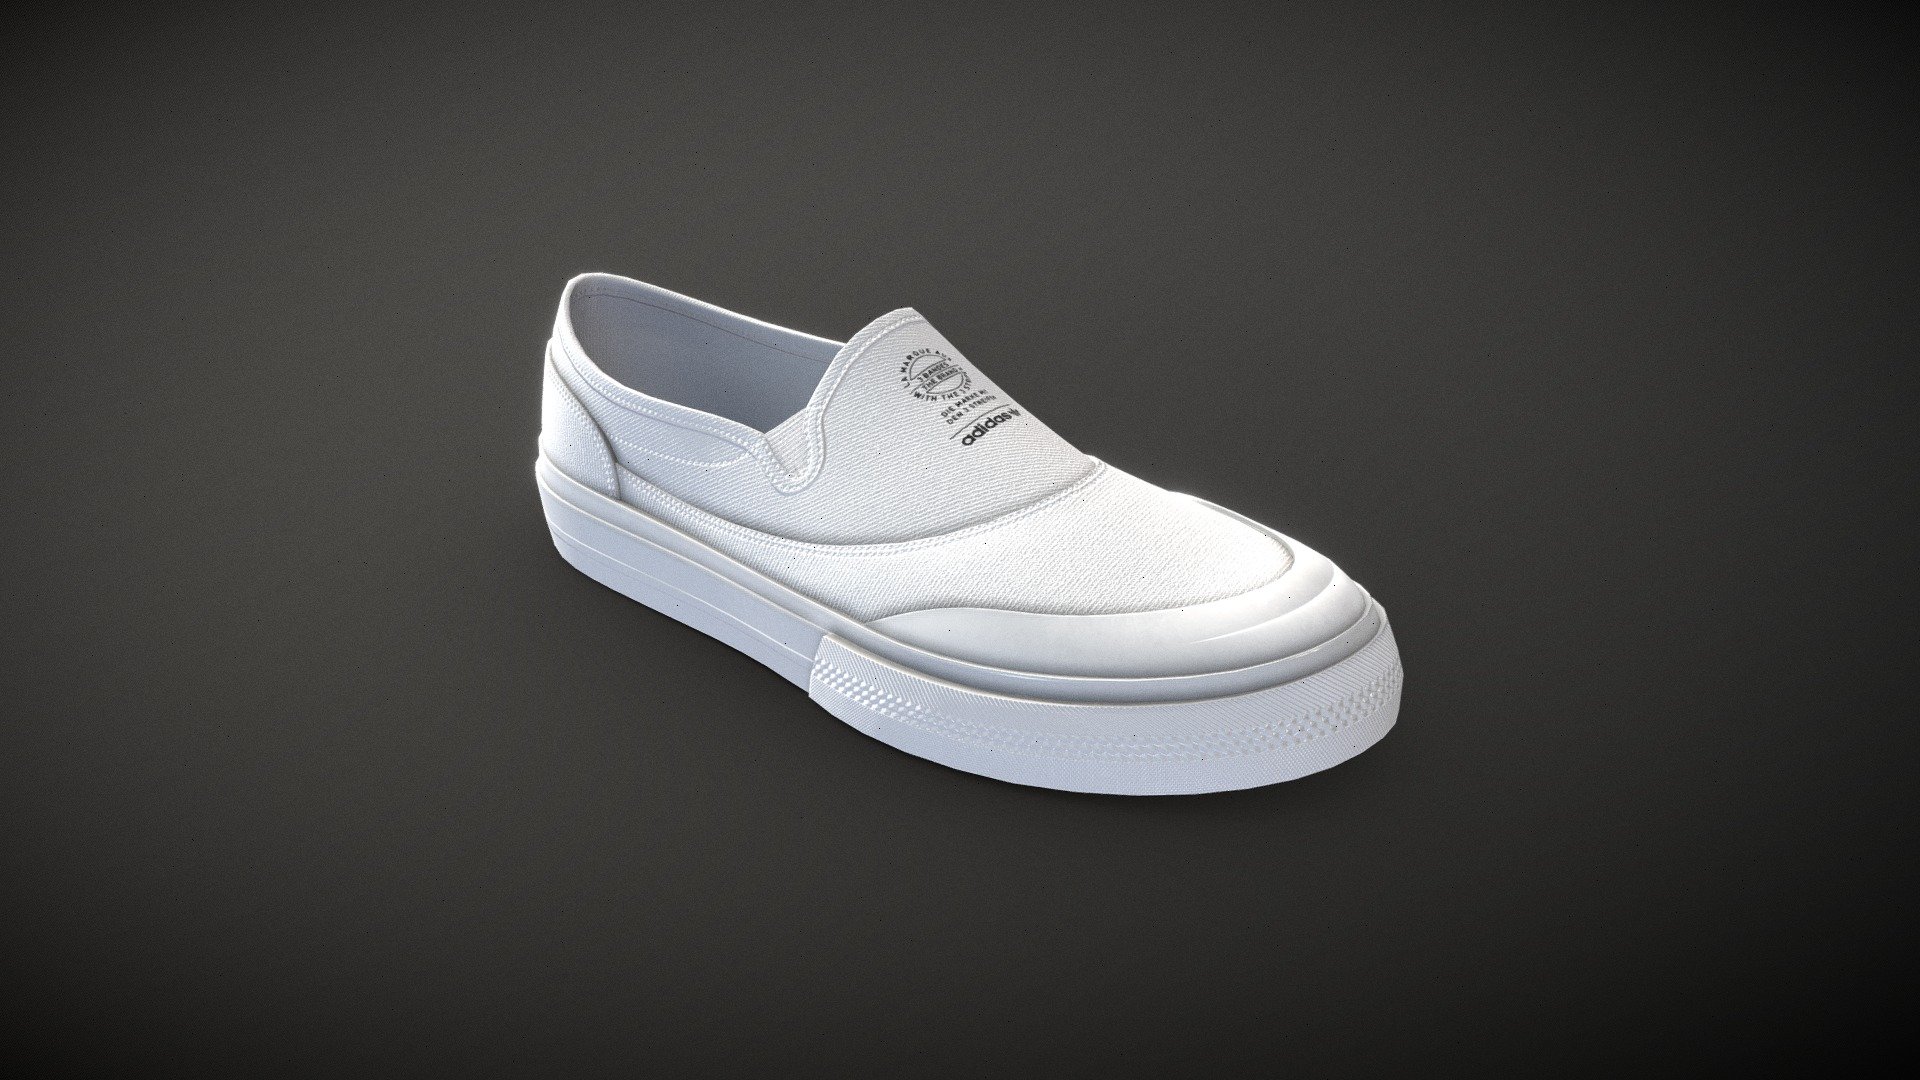 Adidas Nizza RF Slip

Game and production ready, polycount optimized for quality, ideal for high quality Characters and Close-Ups
Internal parts modeled and textured, ideal for customization or animation

Single UV space
PBR and UE4 4k Textures
Low Poly has 2.3k quads
FBX, OBJ, ZTL

Includes Color variant - Black/White - Adidas Nizza RF Slip - Buy Royalty Free 3D model by Feds452 3d model